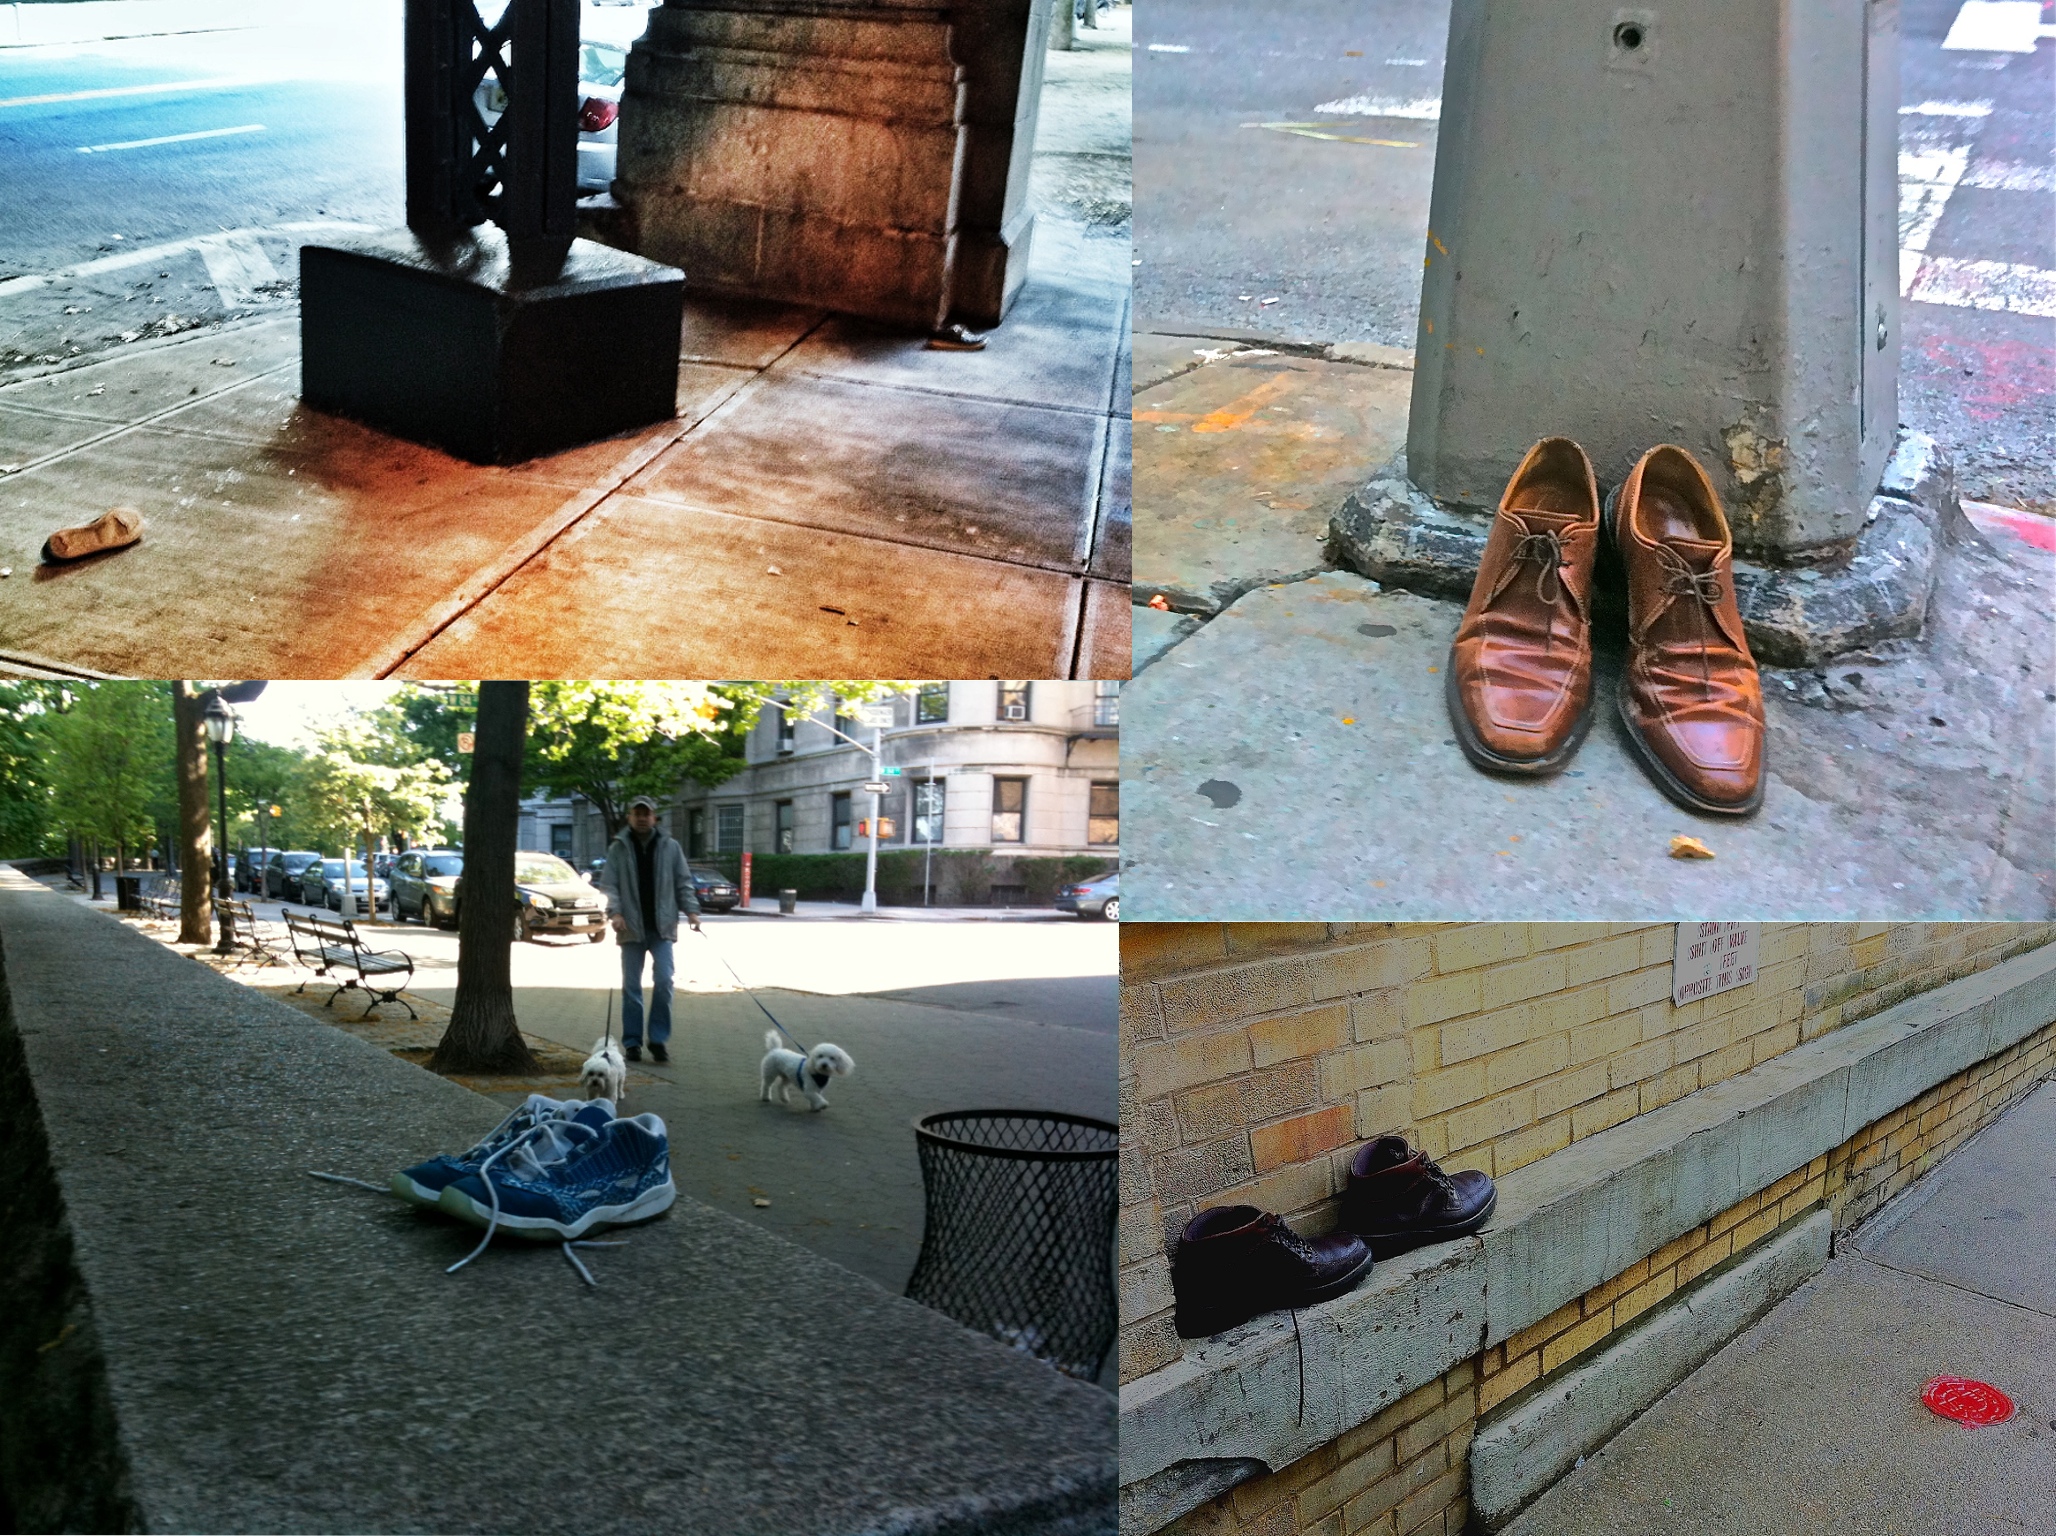 WHY WOULD PEOPLE LEAVE THEIR SHOES BEHIND?